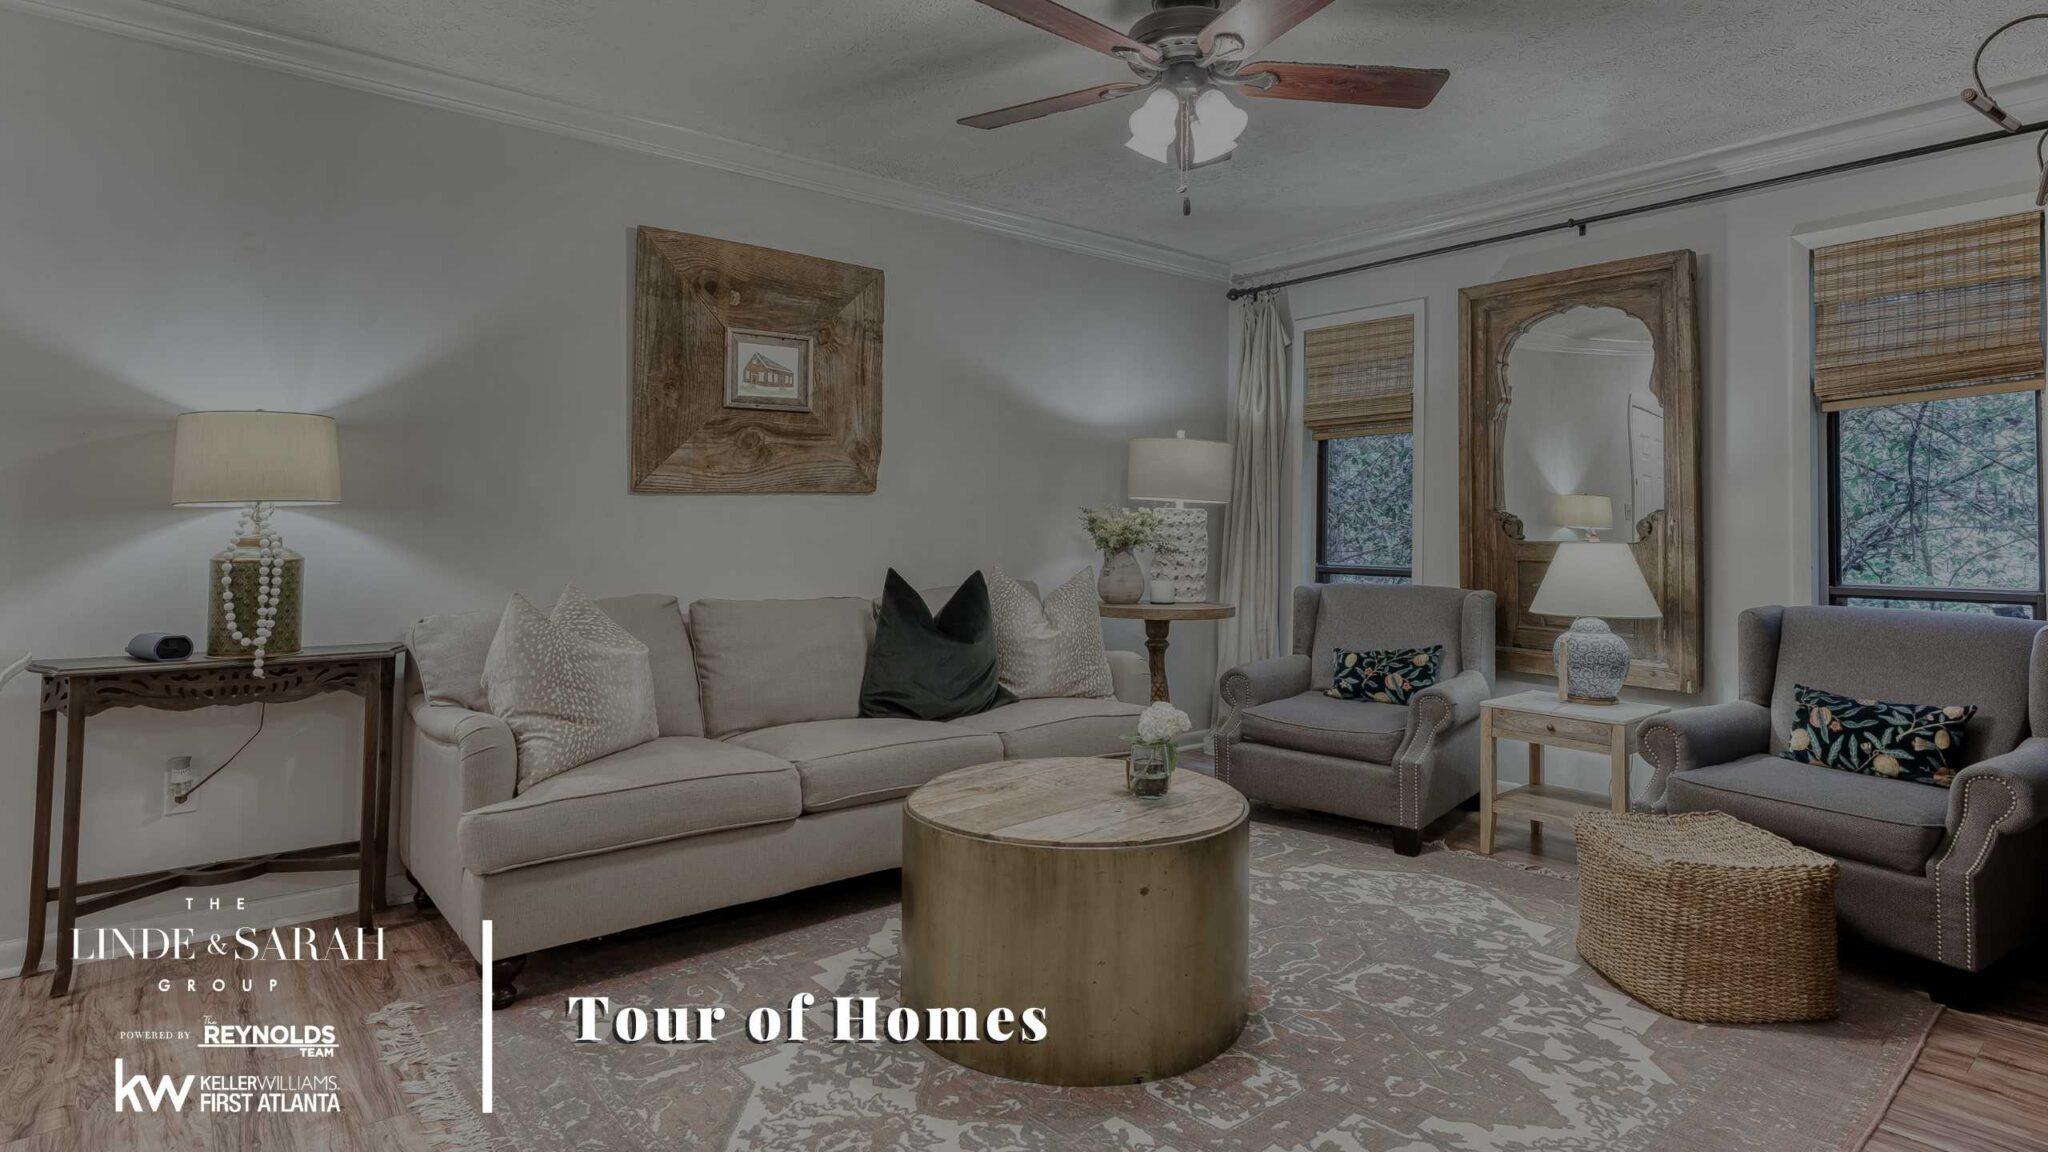 Tour of Homes Sept.18th-19th